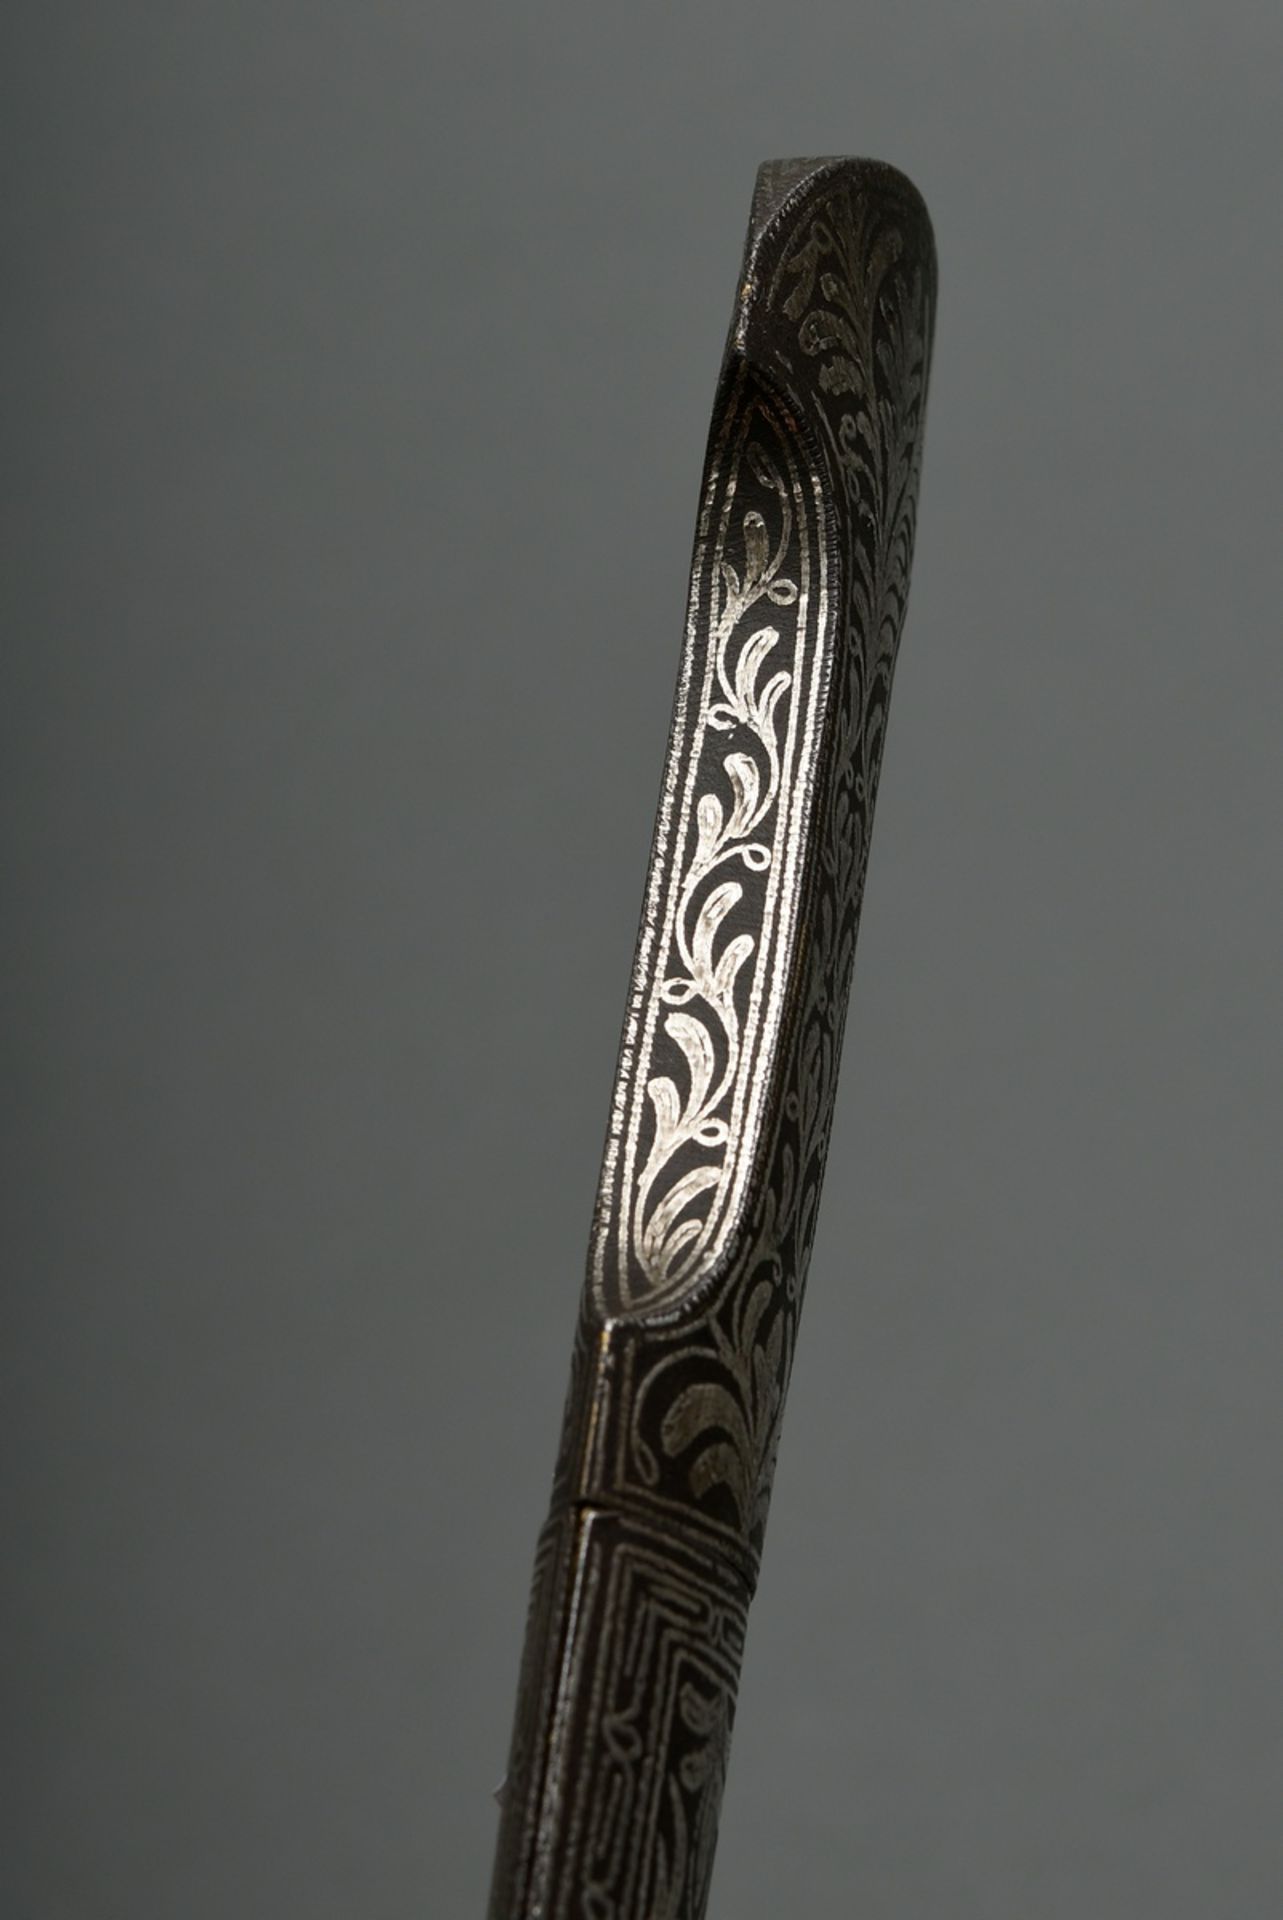 Mughal dagger with silver-inlaid floral motif on handle and scabbard and double-edged blade with in - Image 5 of 6